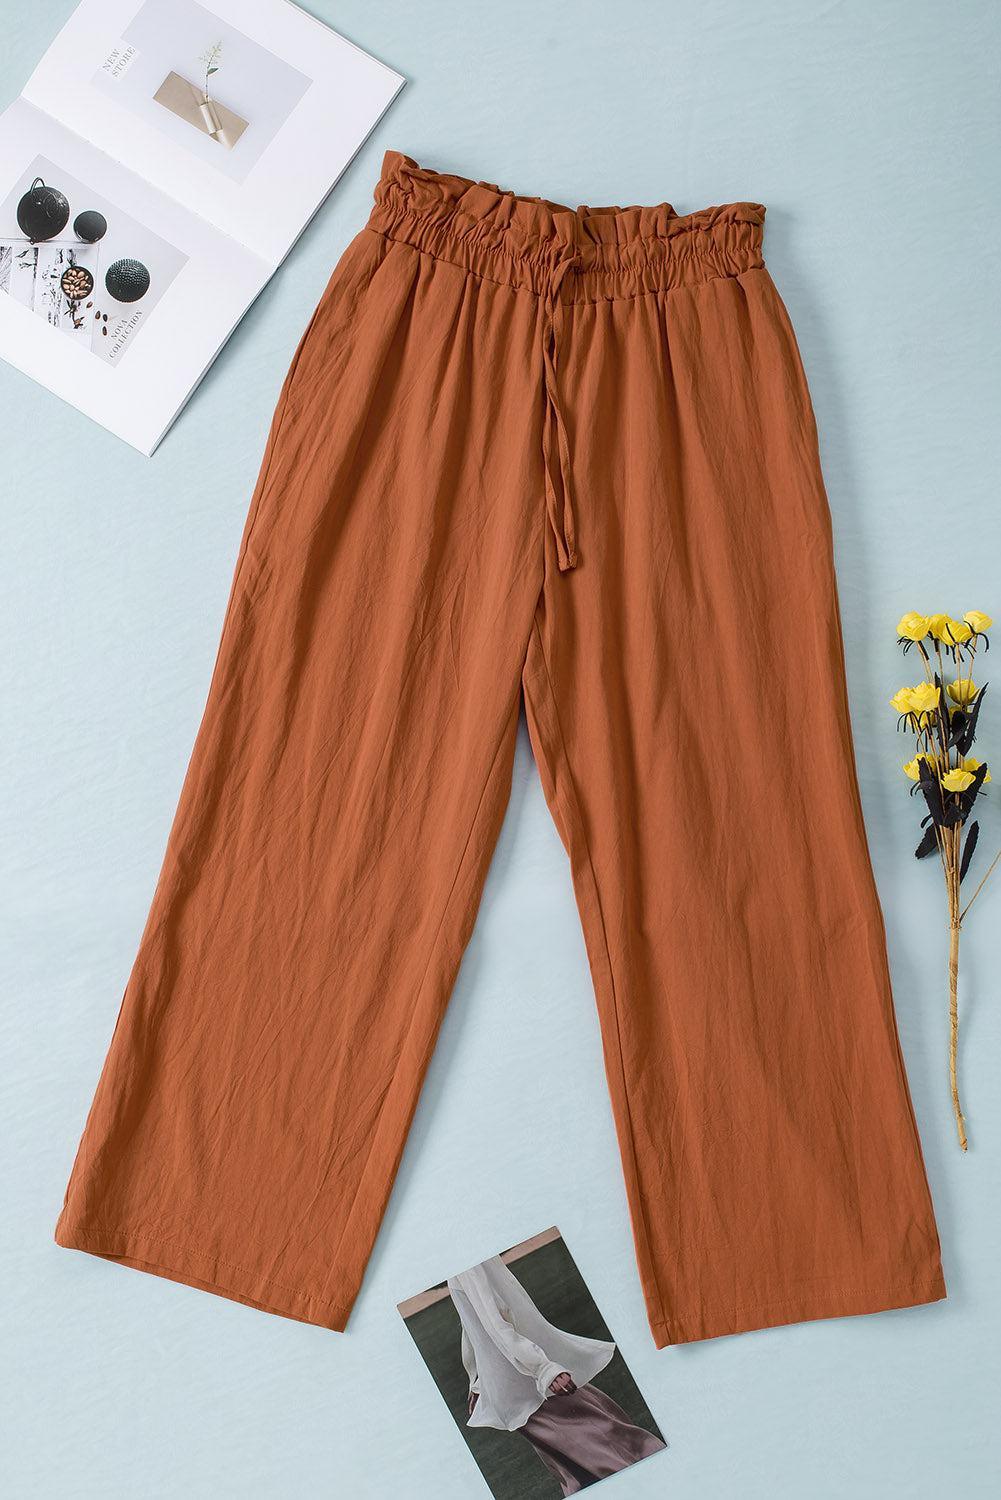 a pair of brown pants next to a yellow flower